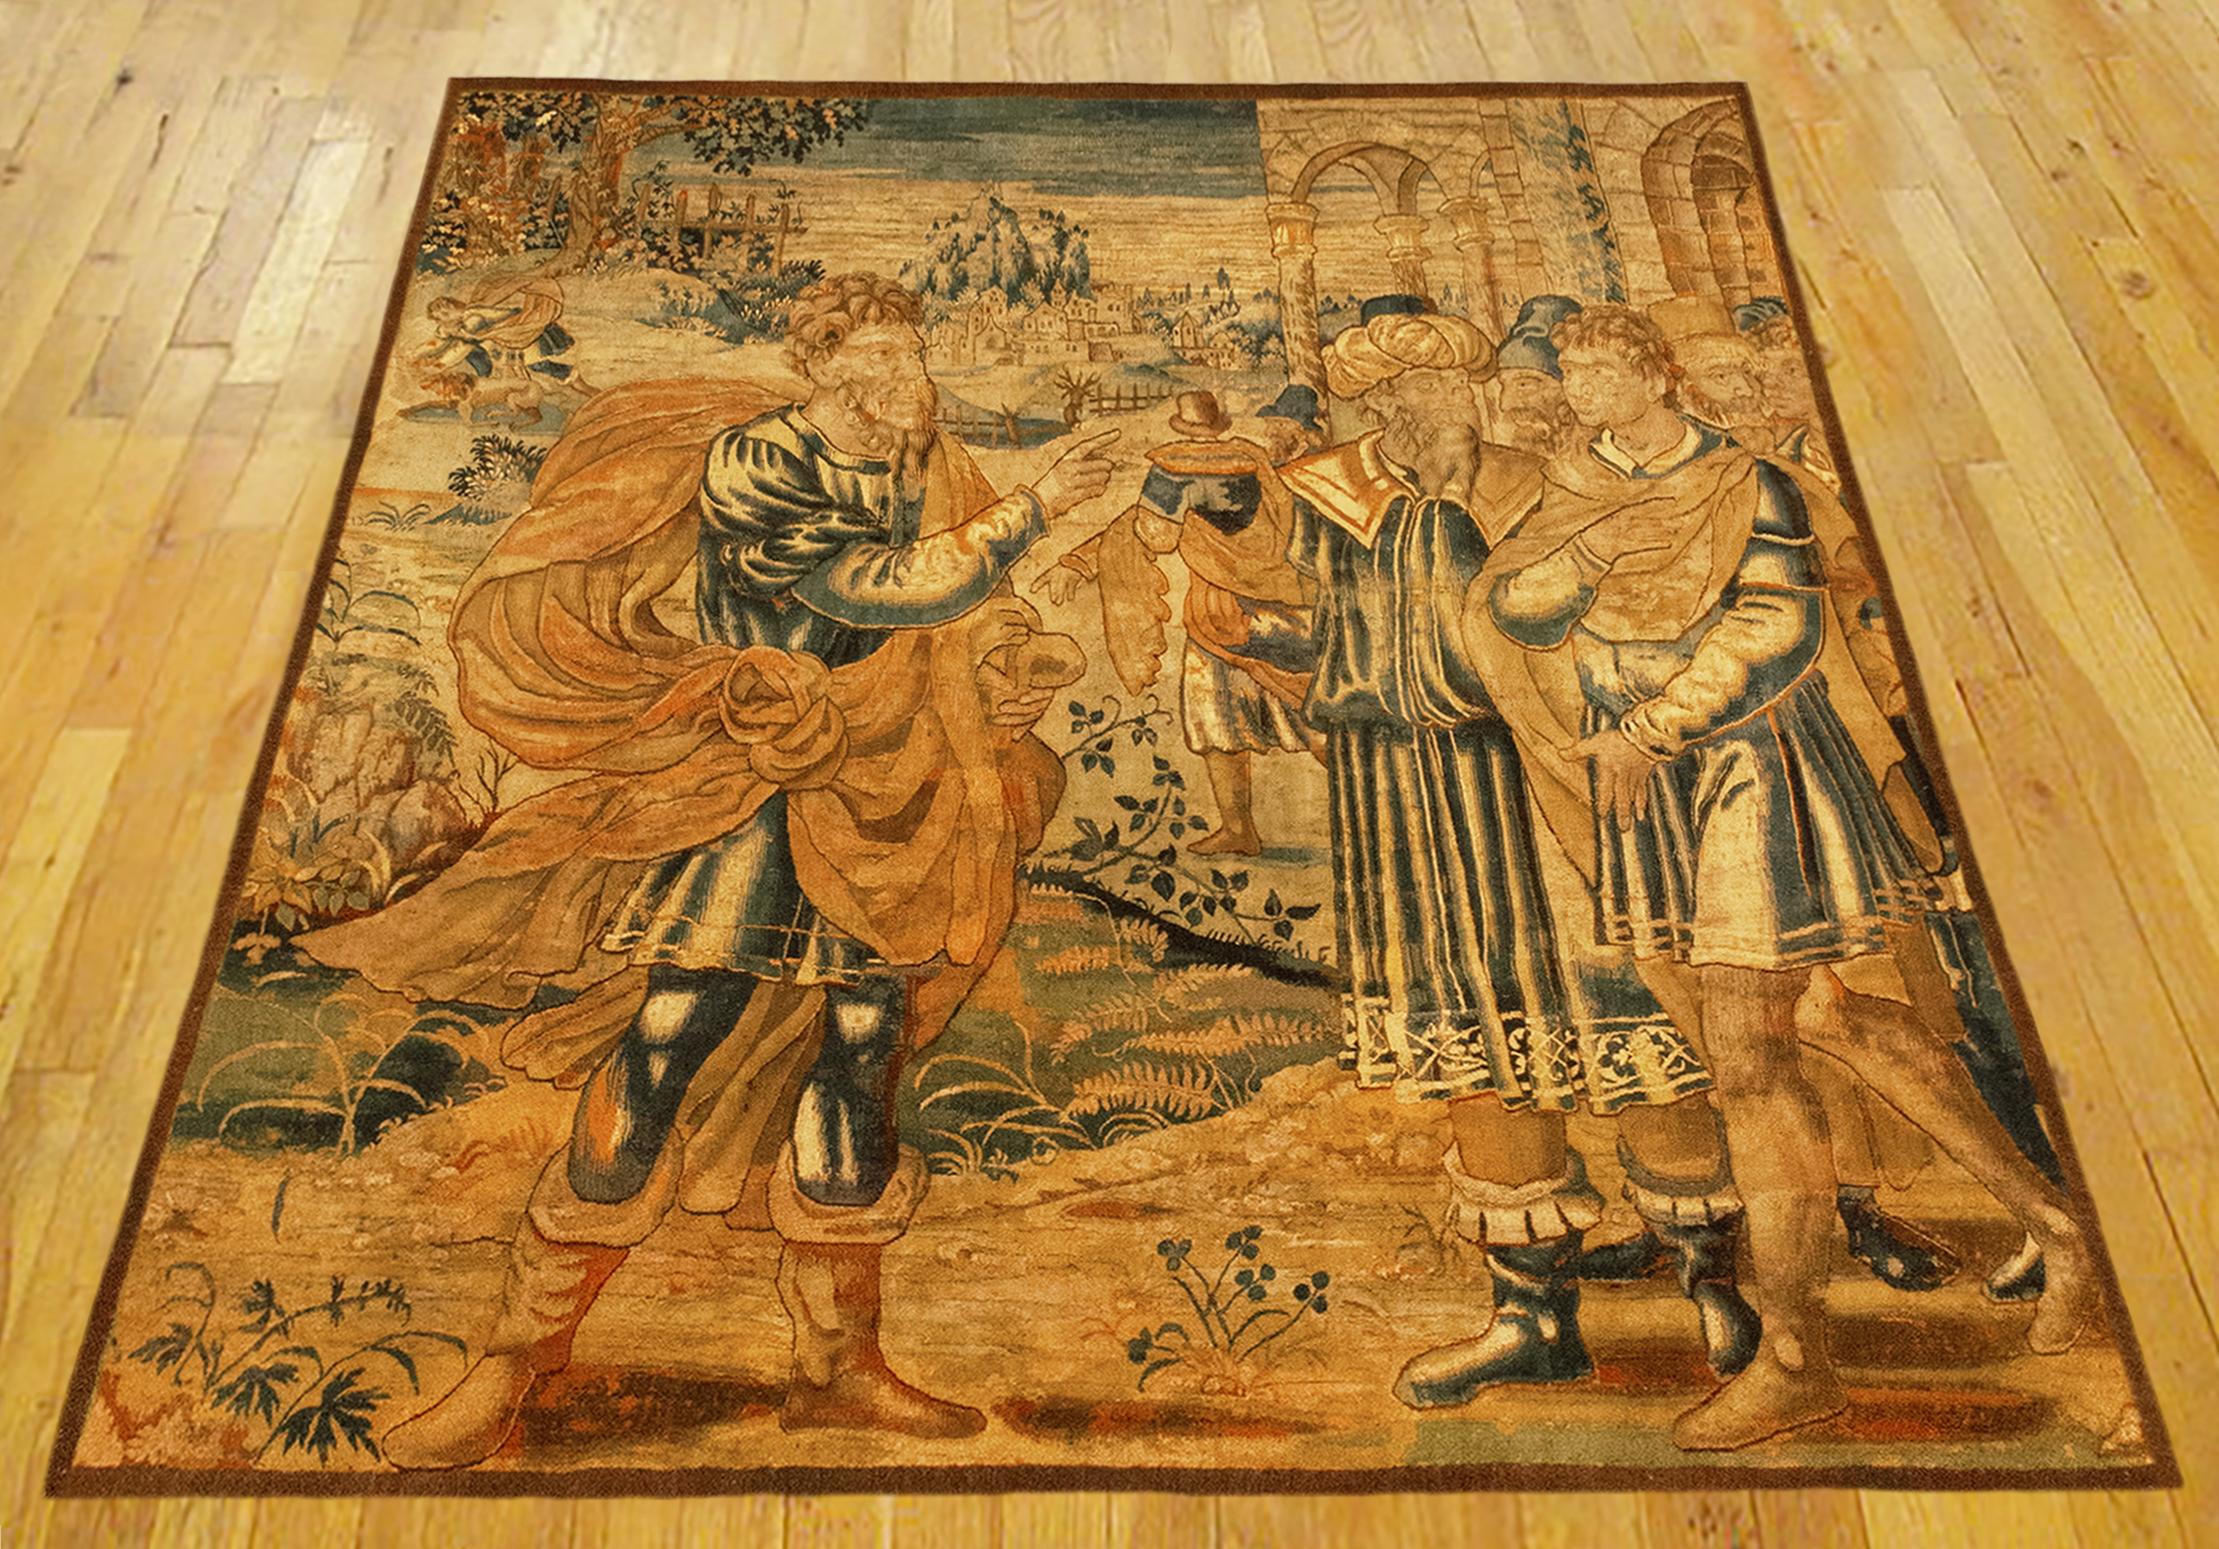 A Flemish tapestry from the late 16th century, with the renowned Roman general, Scipio at left, after having conquered Carthage in the Battle of Zama, ending the Second Punic War. Measures: 8’6” H x 7’9” W.

Scipio stands victorious at left,